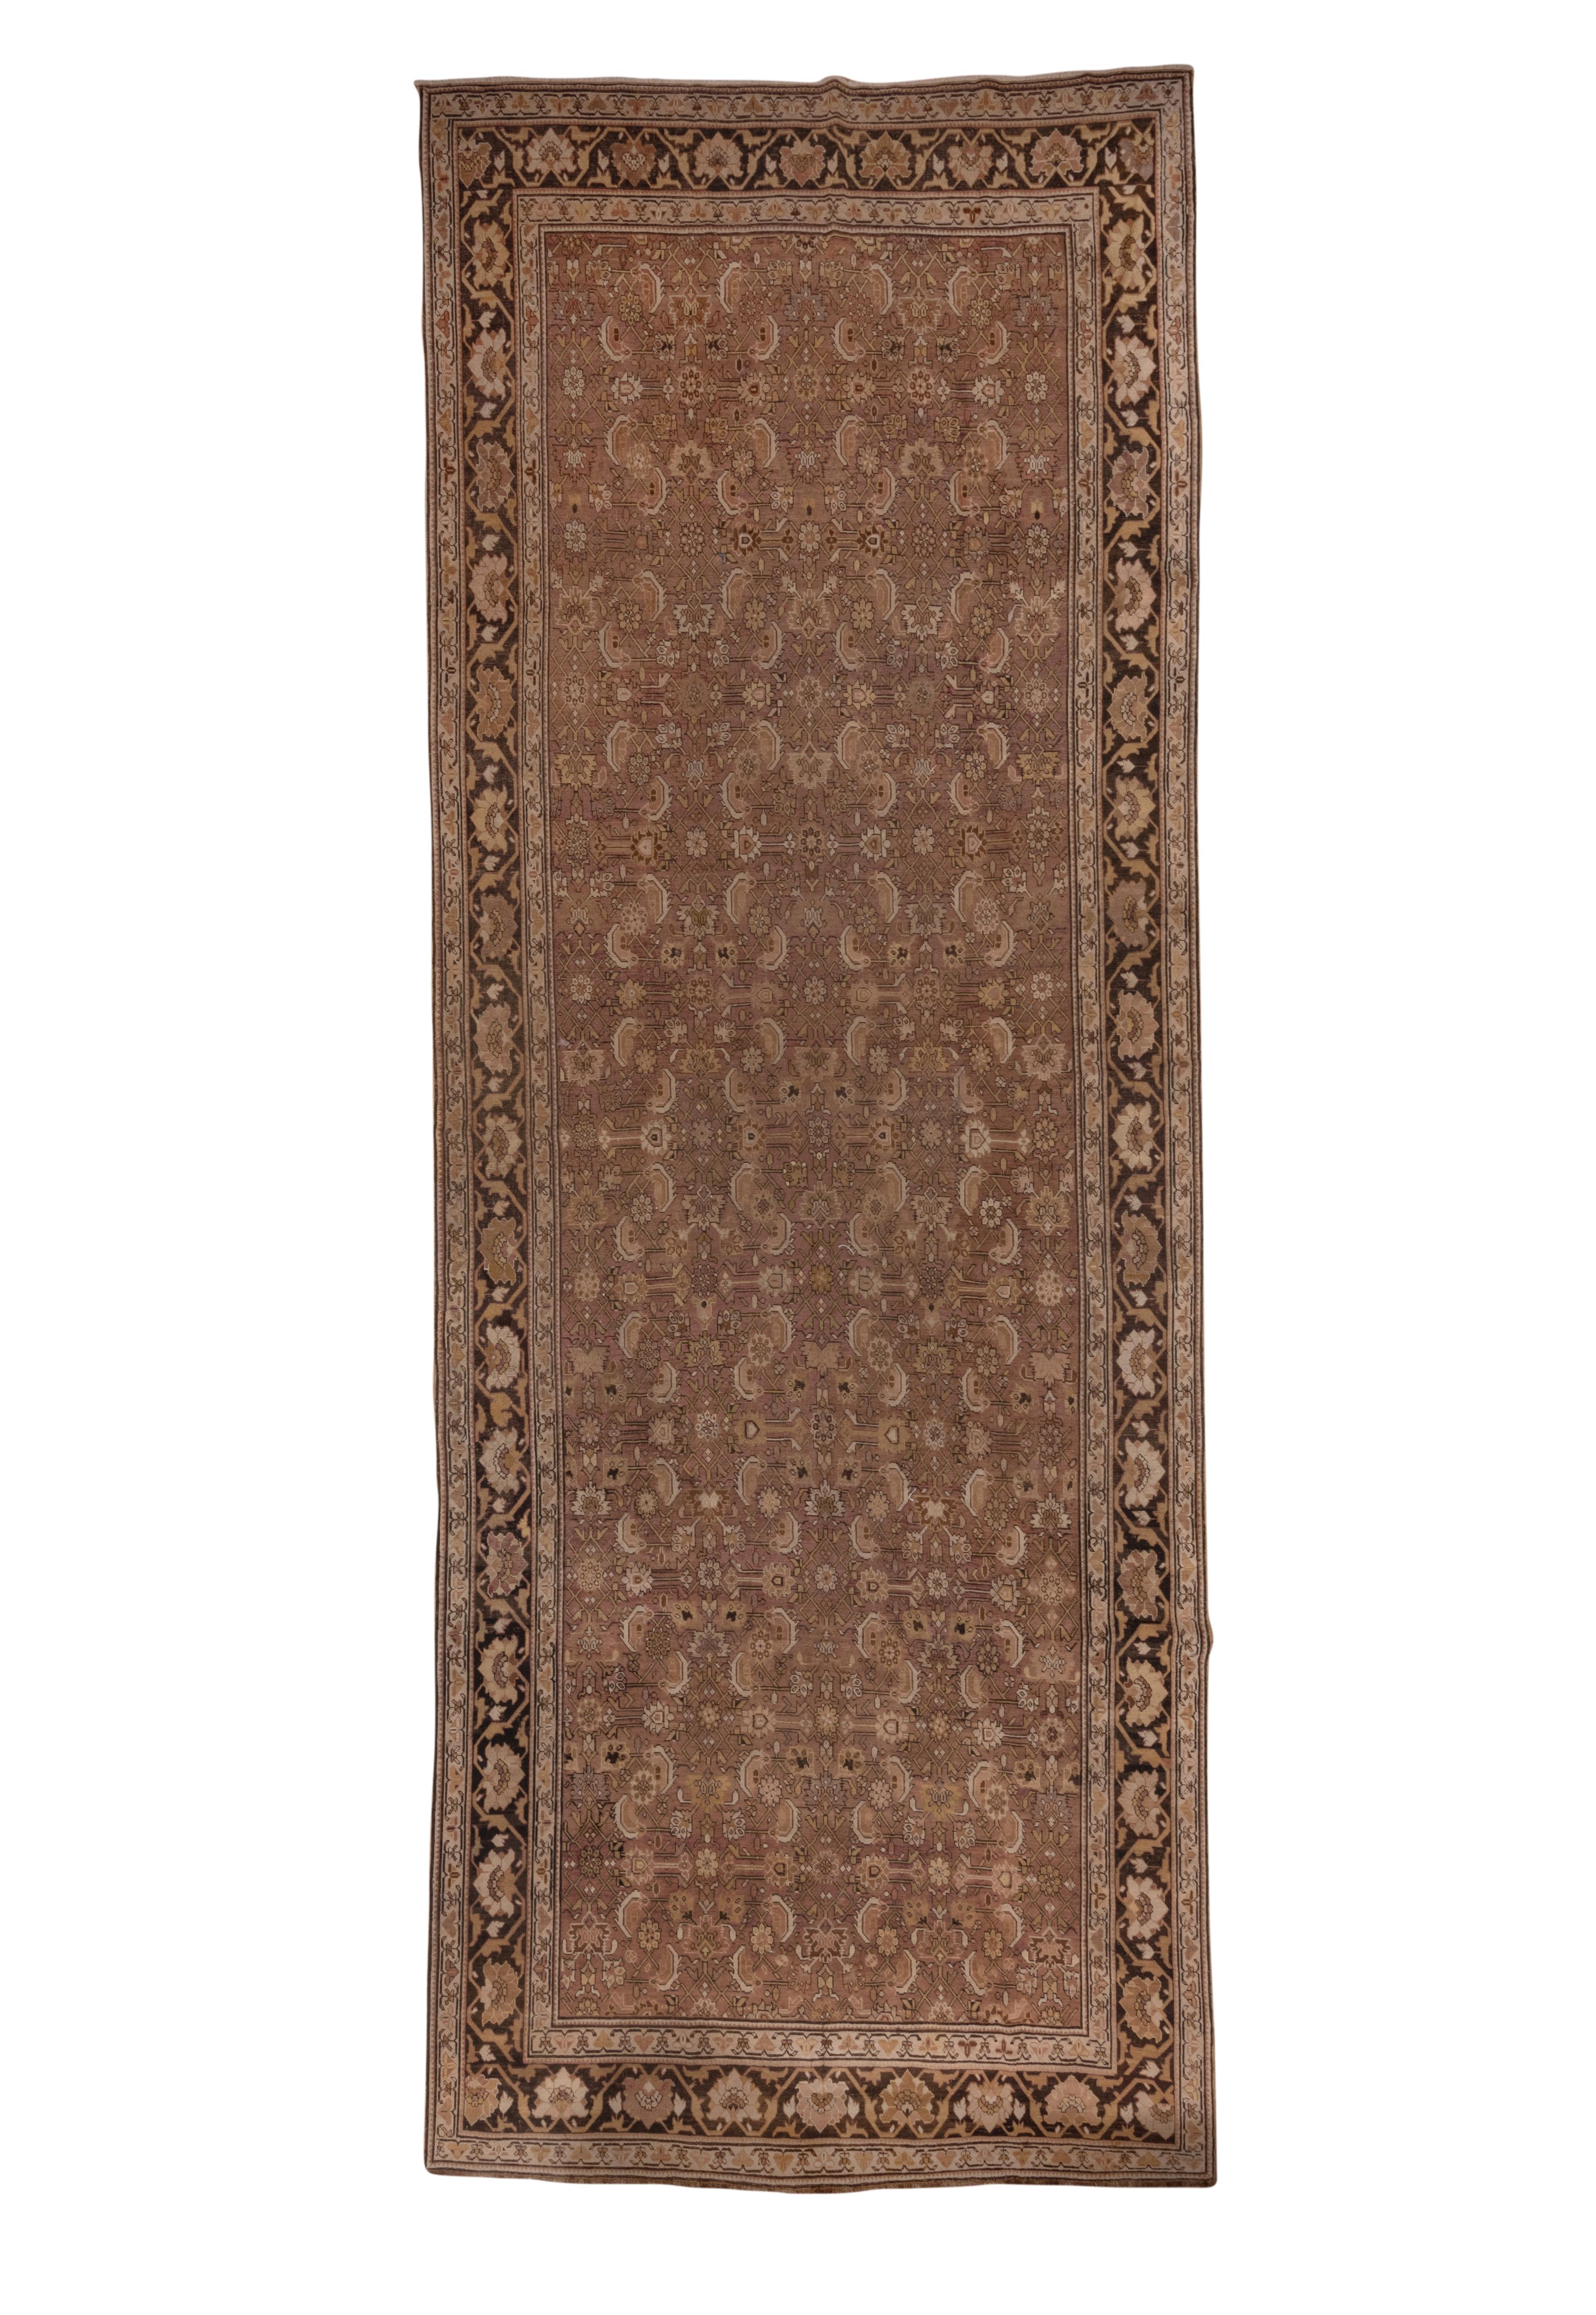 Early 20th Century Fine Antique Caucasian Karabagh Gallery Rug, Brown Tones, circa 1900s For Sale